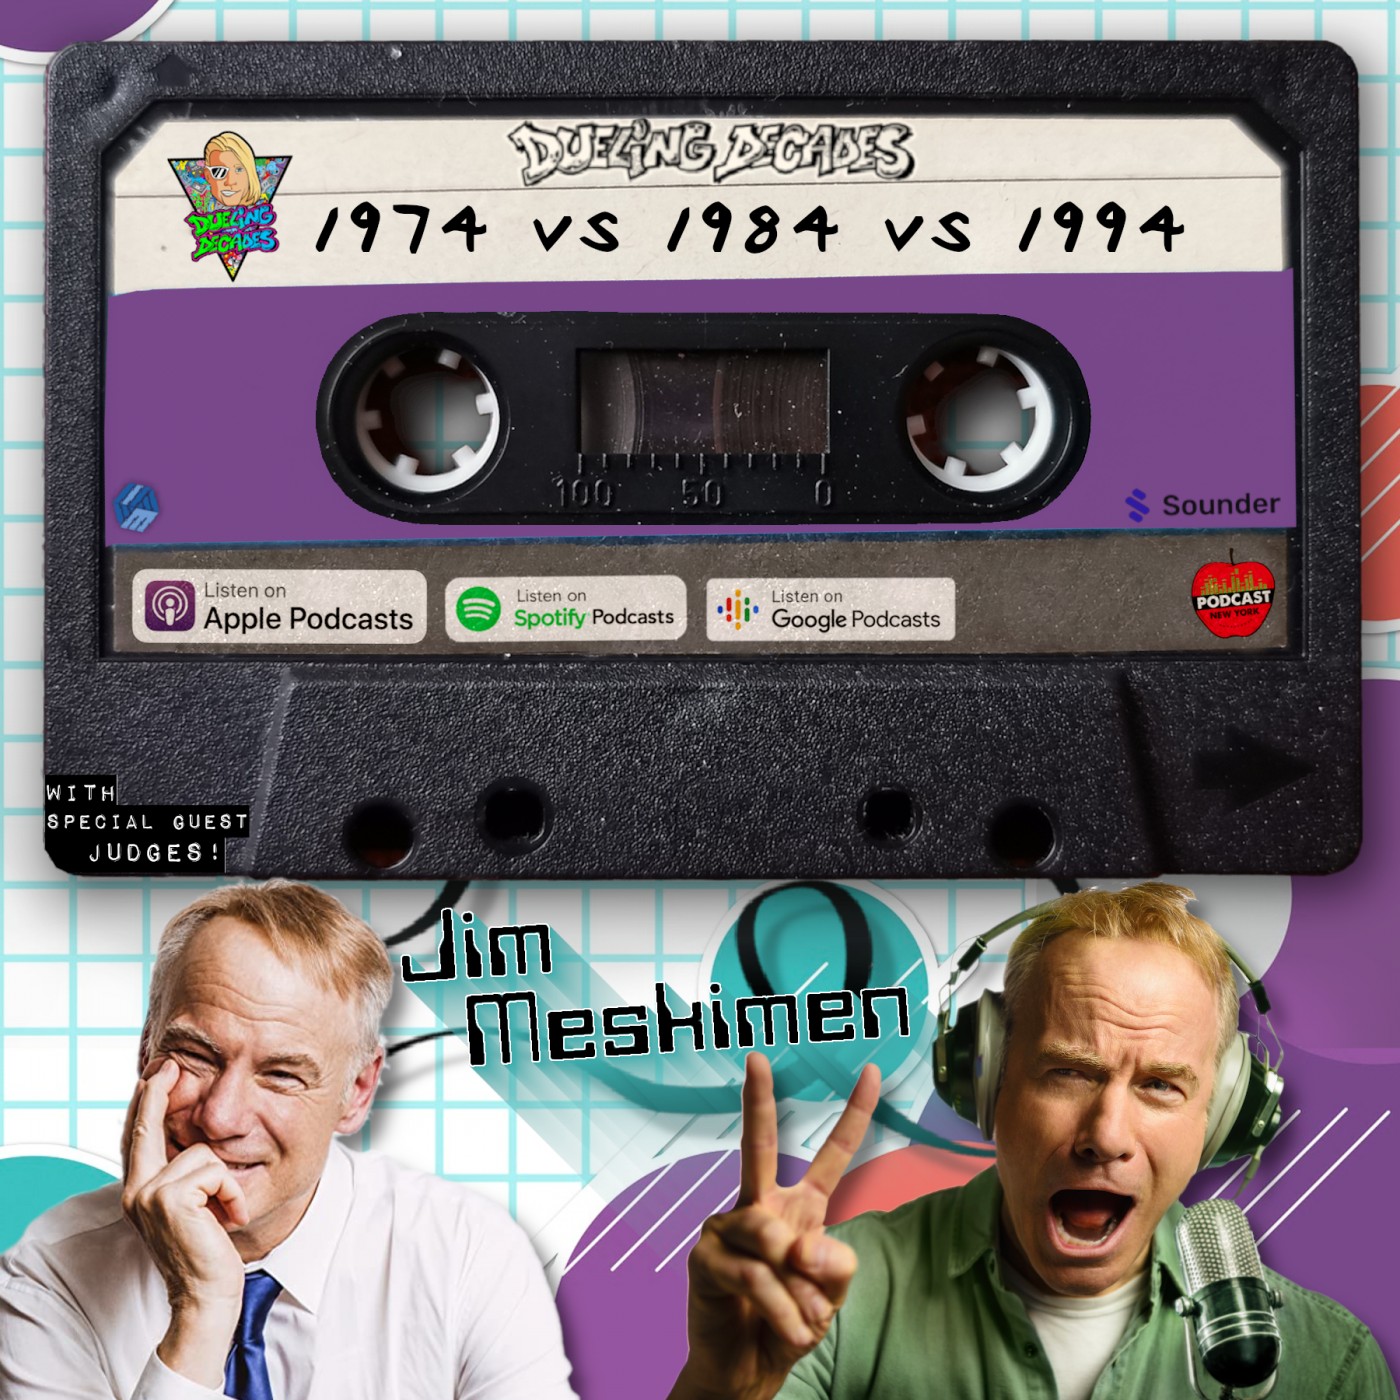 Artwork for podcast Dueling Decades